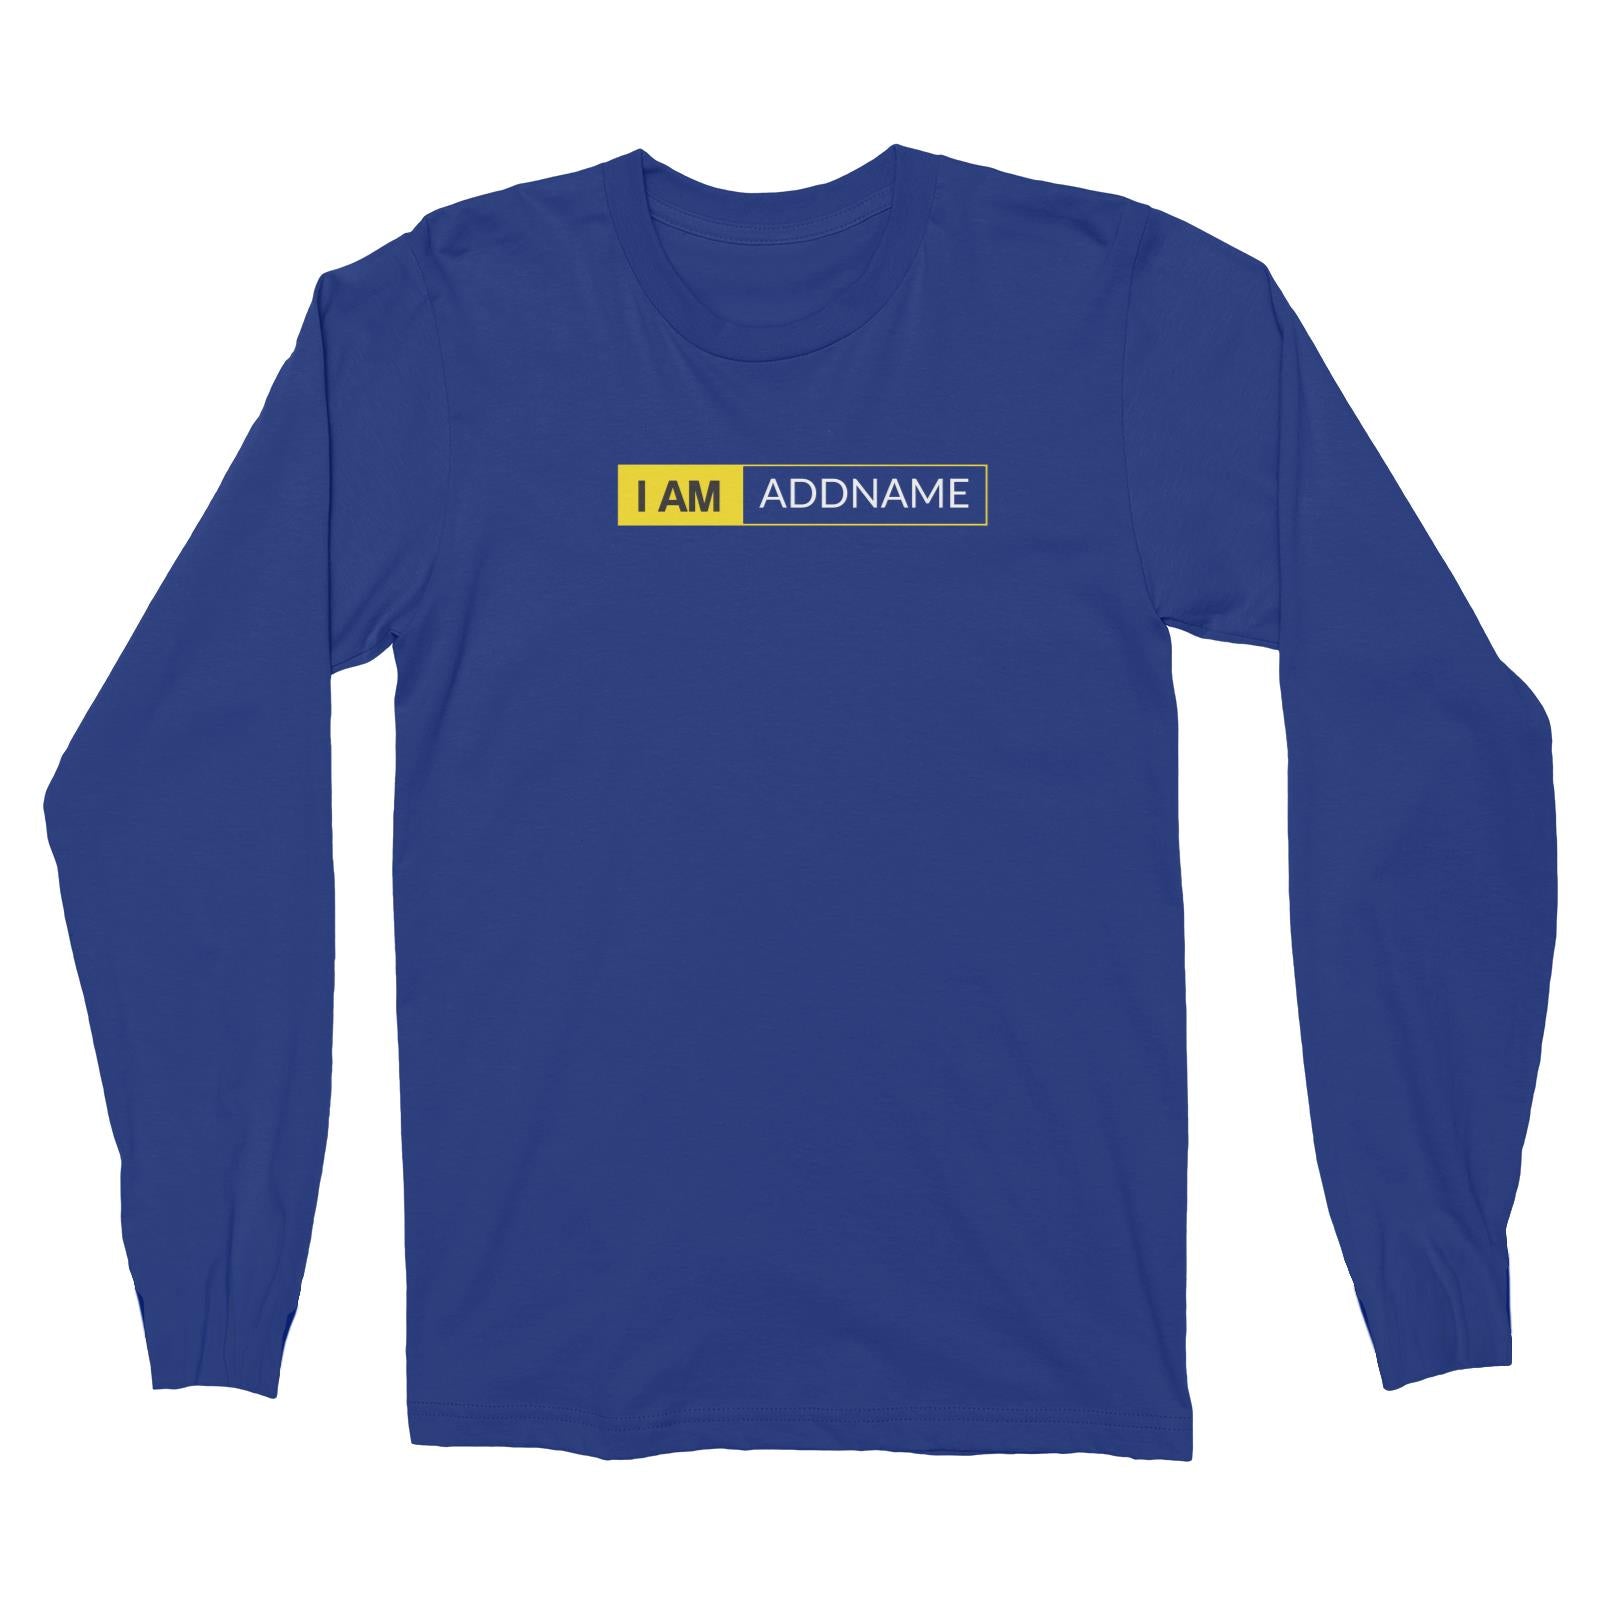 I AM Addname in Yellow Box Long Sleeve Unisex T-Shirt Basic Nikon Matching Family Personalizable Designs